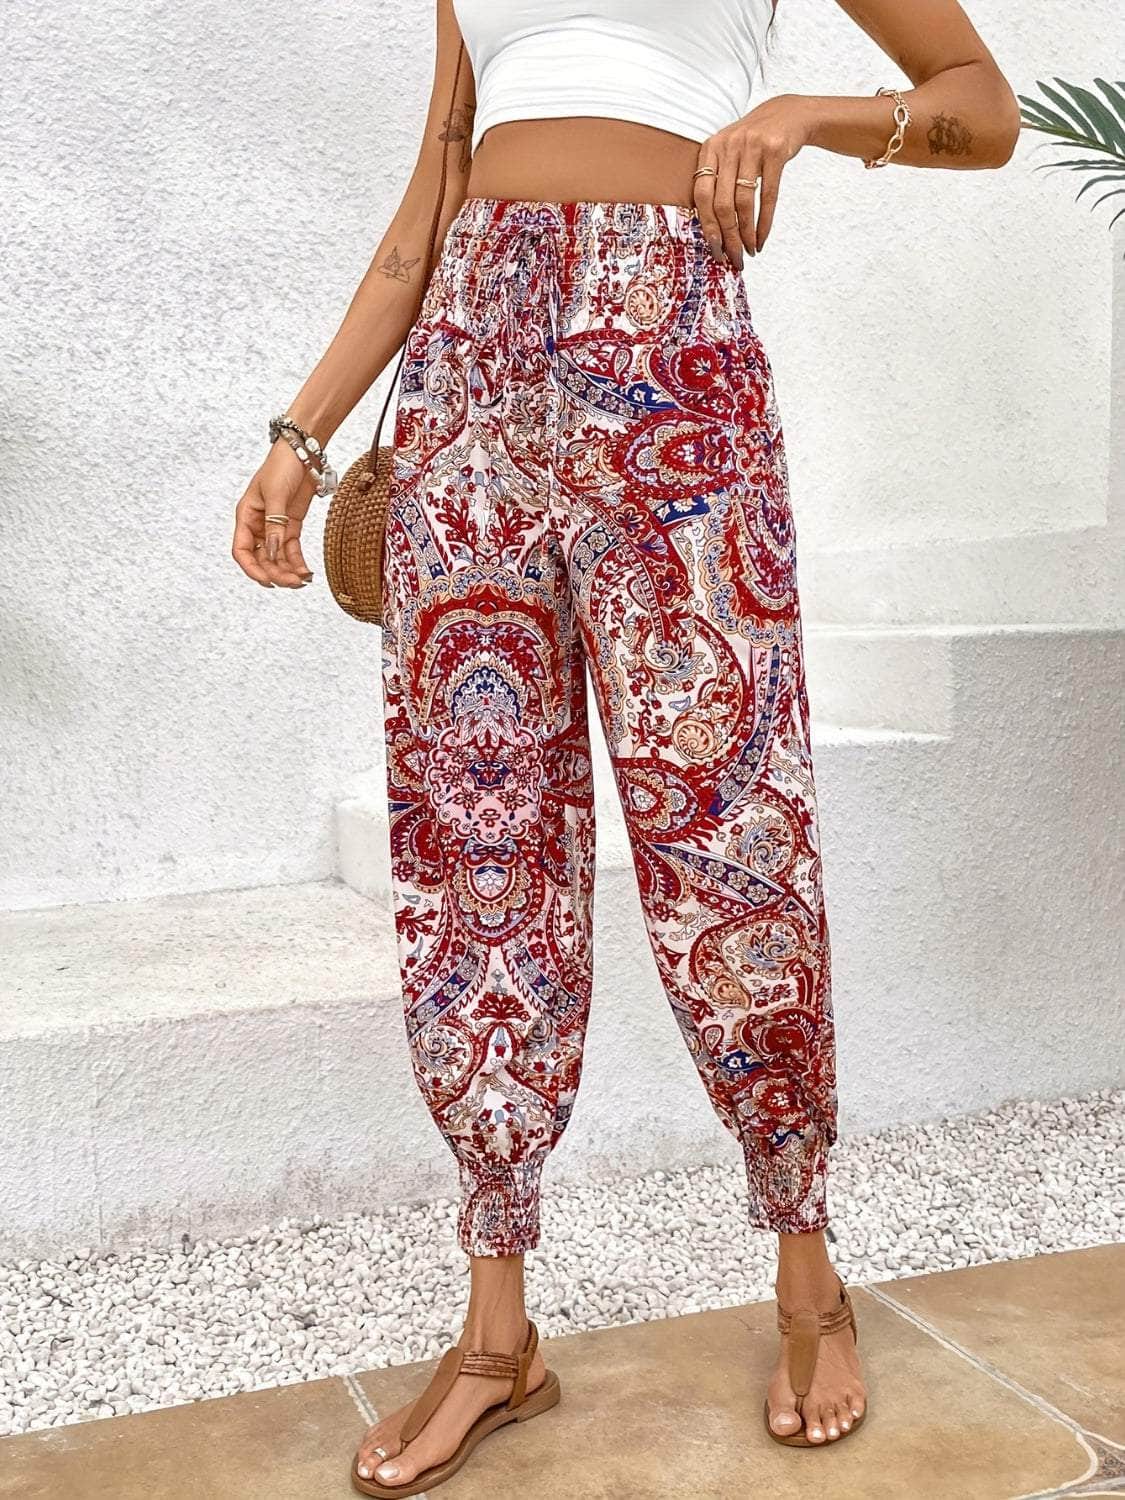 Tied Printed High Waist Pants Multicolor / S